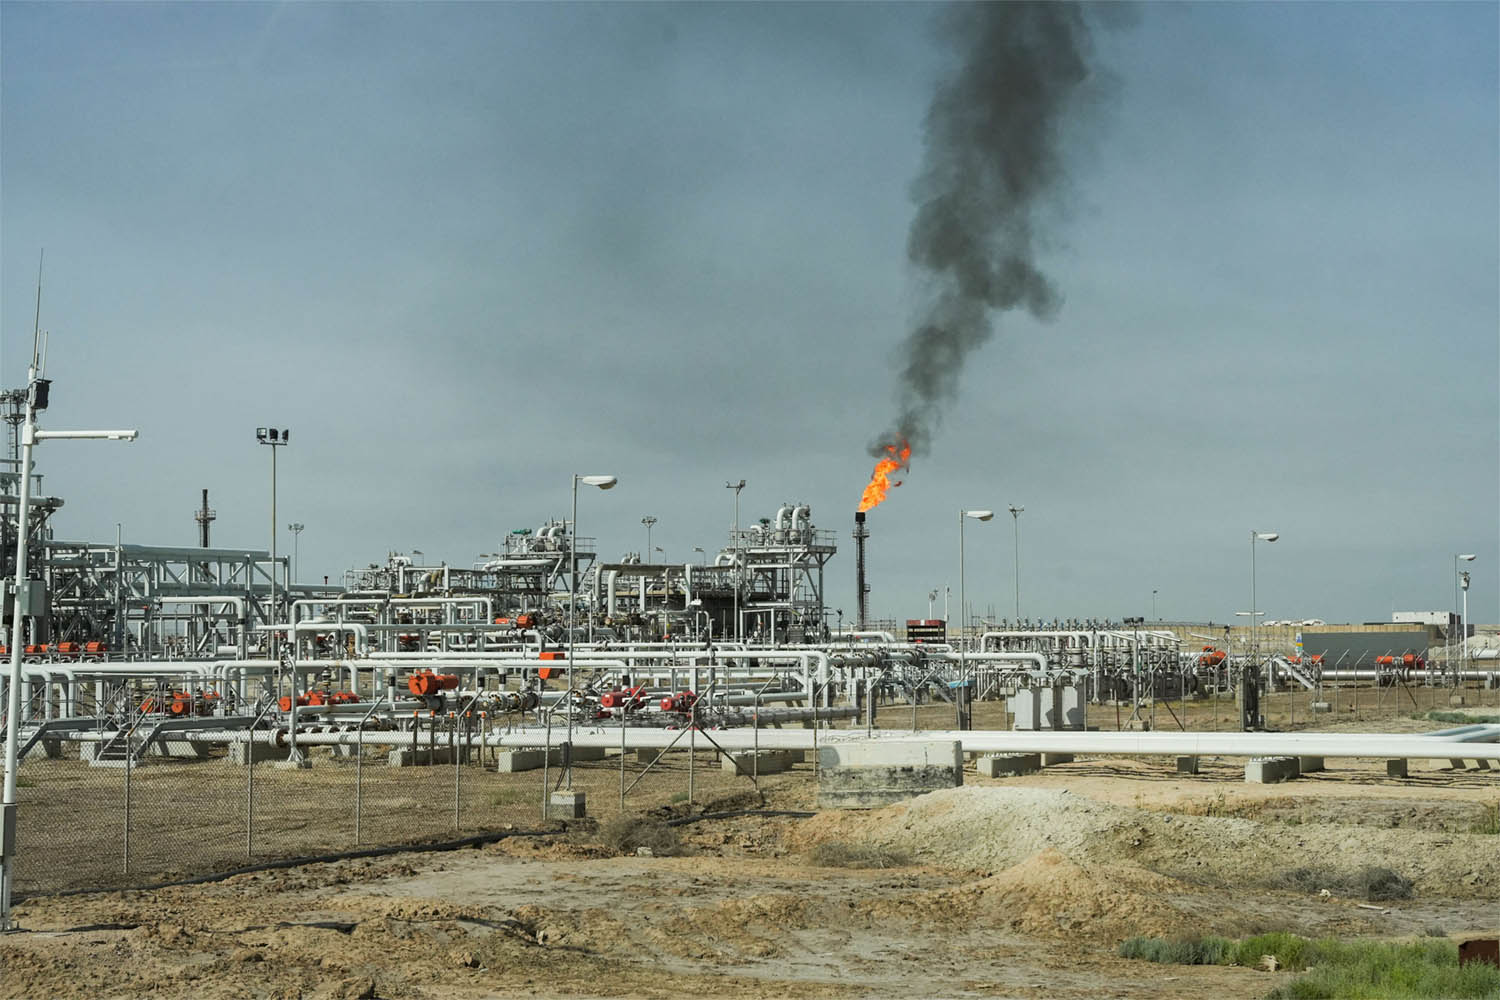 Iraq had extended an agreement with Jordan for another year to supply it with 10,000 bpd of crude oil under preferential terms